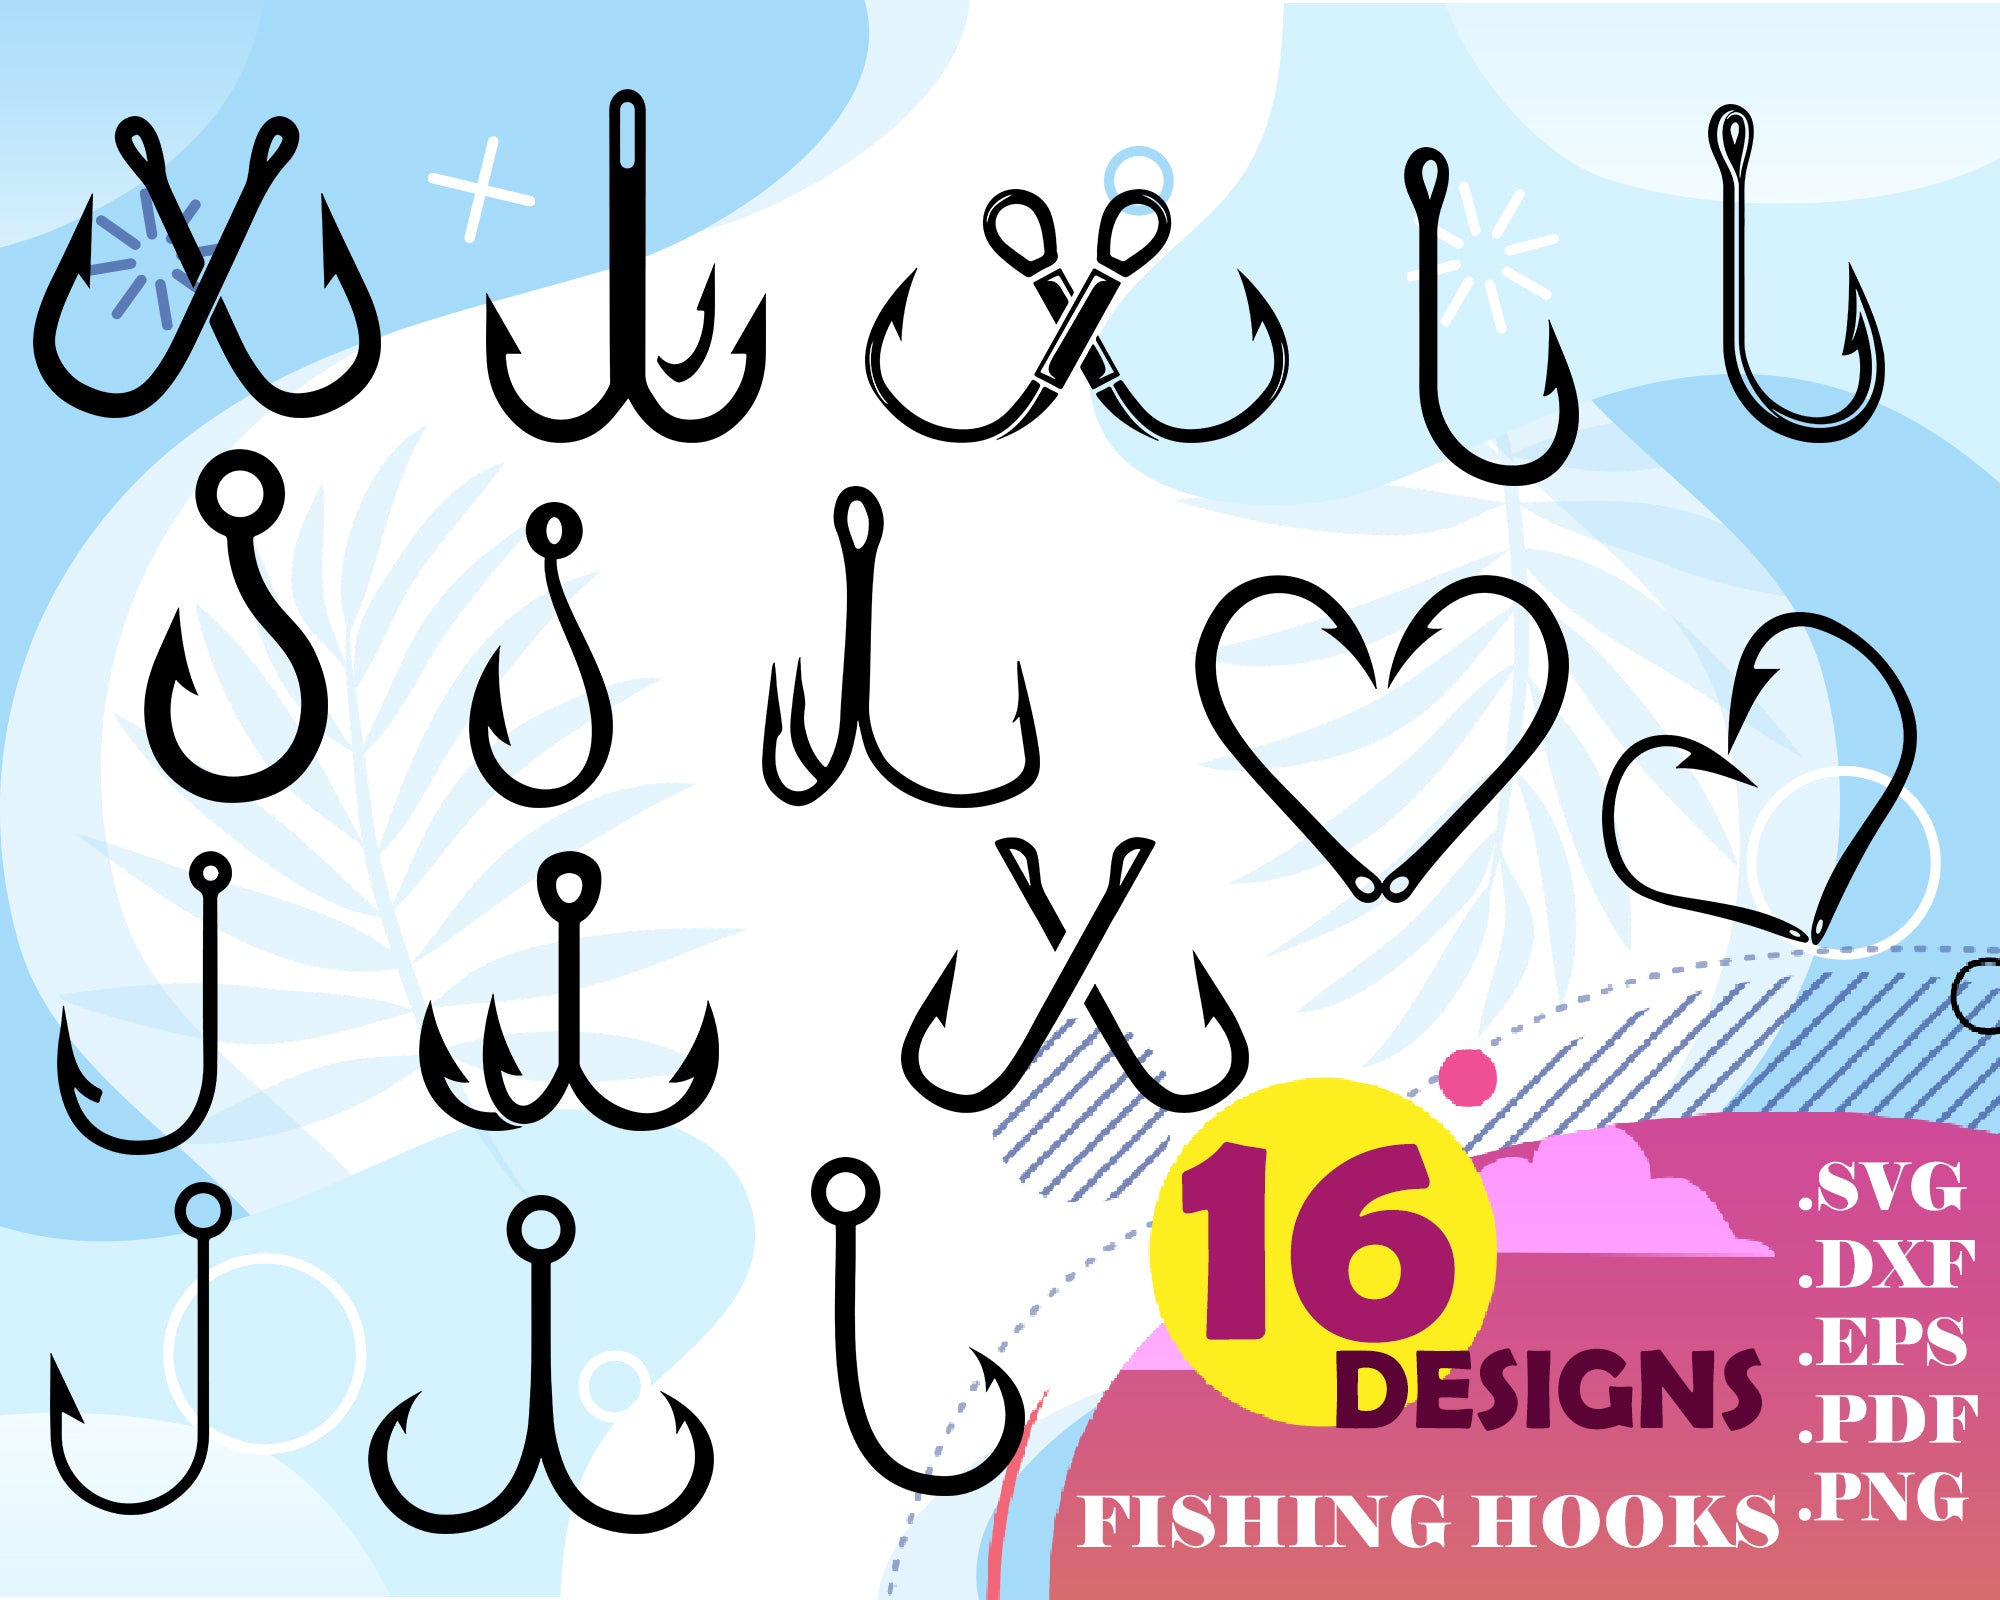 Love To Fish Hook Cat Fishing Digital Cut Files Svg Studio 3 File For Silhouette Brother Cricut Cutouts Decals Png Svgs Stencil Truck Car Templates Paper Party Kids Msisab Com